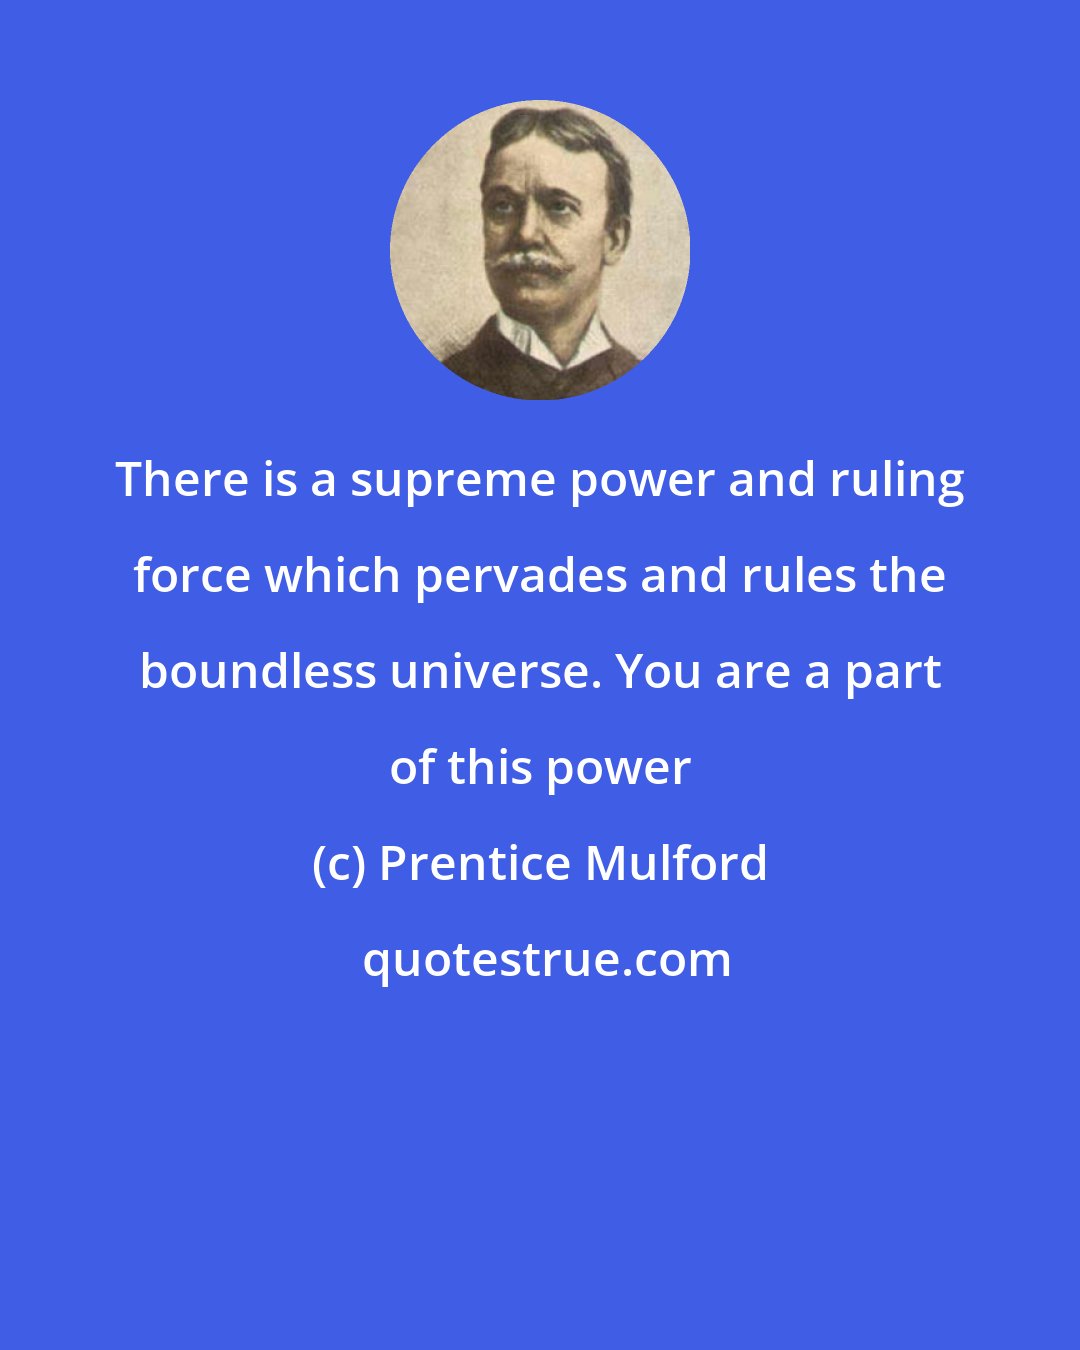 Prentice Mulford: There is a supreme power and ruling force which pervades and rules the boundless universe. You are a part of this power